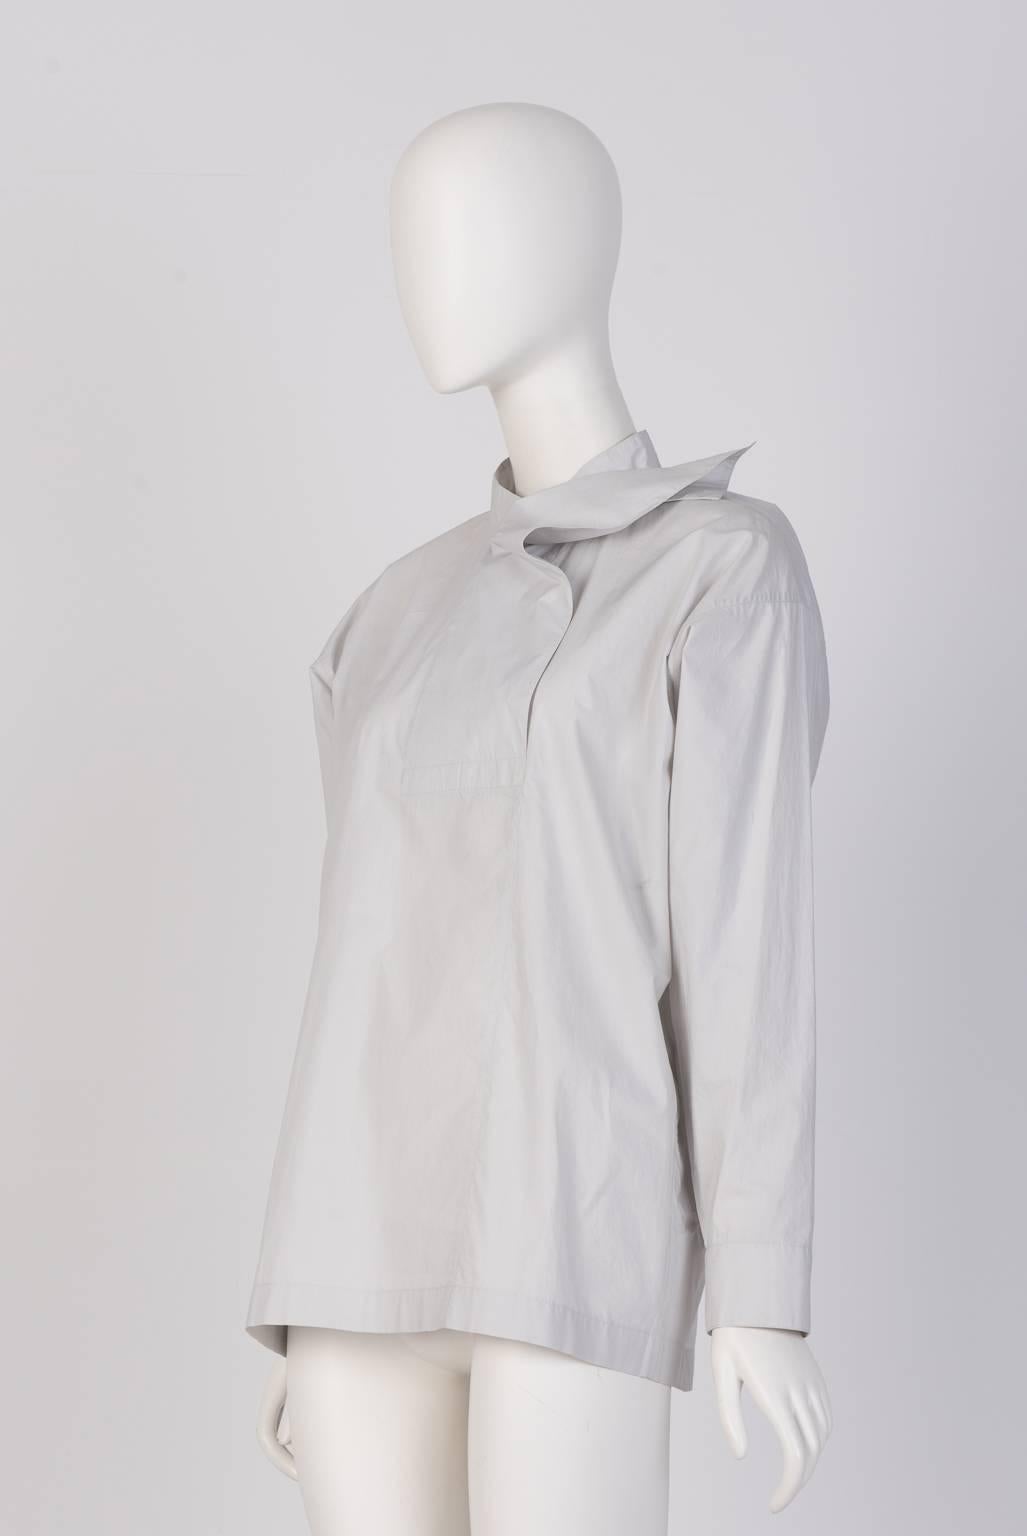 Oversized Issey Miyake poplin cotton shirt with a special unbuttonable collar design. Box pleat at the back. Light Grey color. 